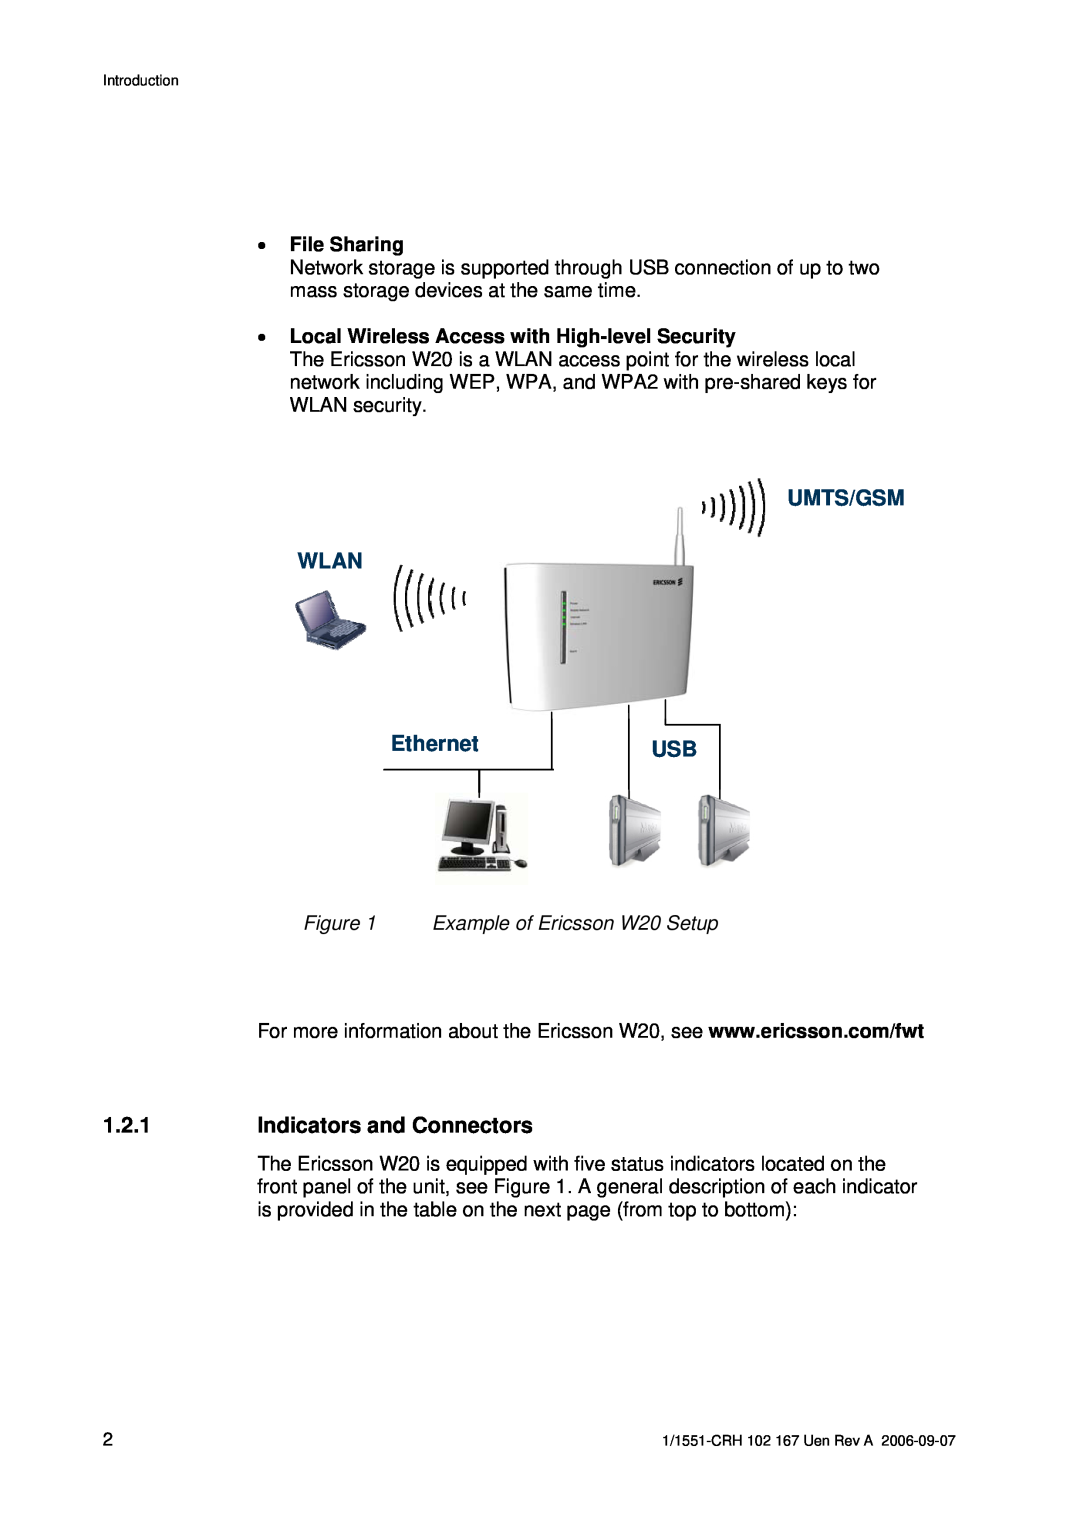 Ericsson W20 manual Indicators and Connectors, Umts/Gsm Wlan, Ethernet 